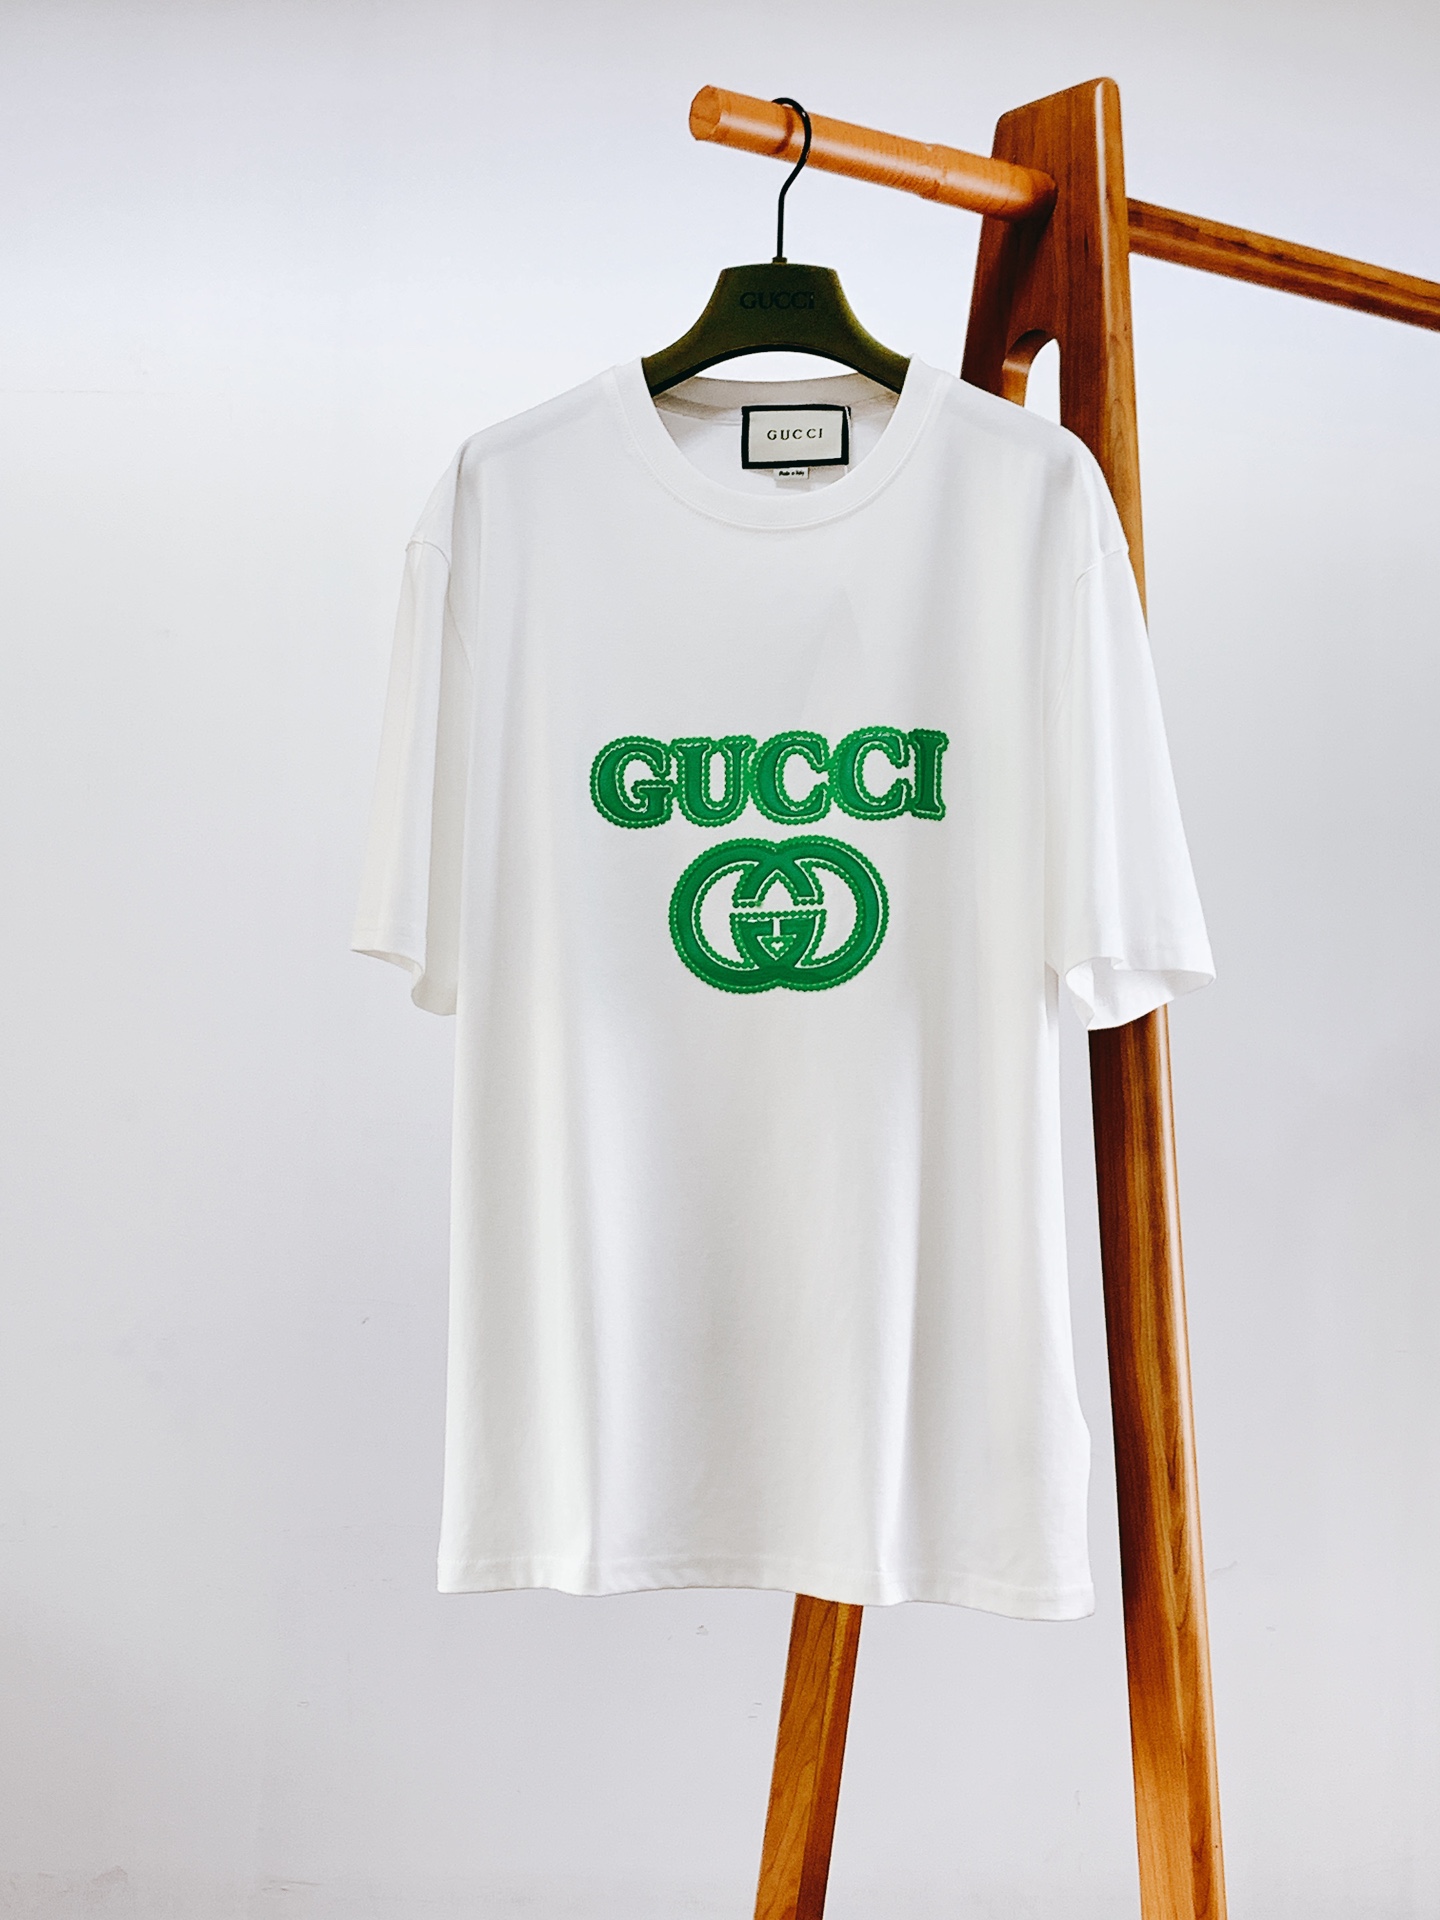 First Copy
 Gucci Clothing T-Shirt Embroidery Unisex Cotton Knitted Knitting Silica Gel Spring/Summer Collection Short Sleeve